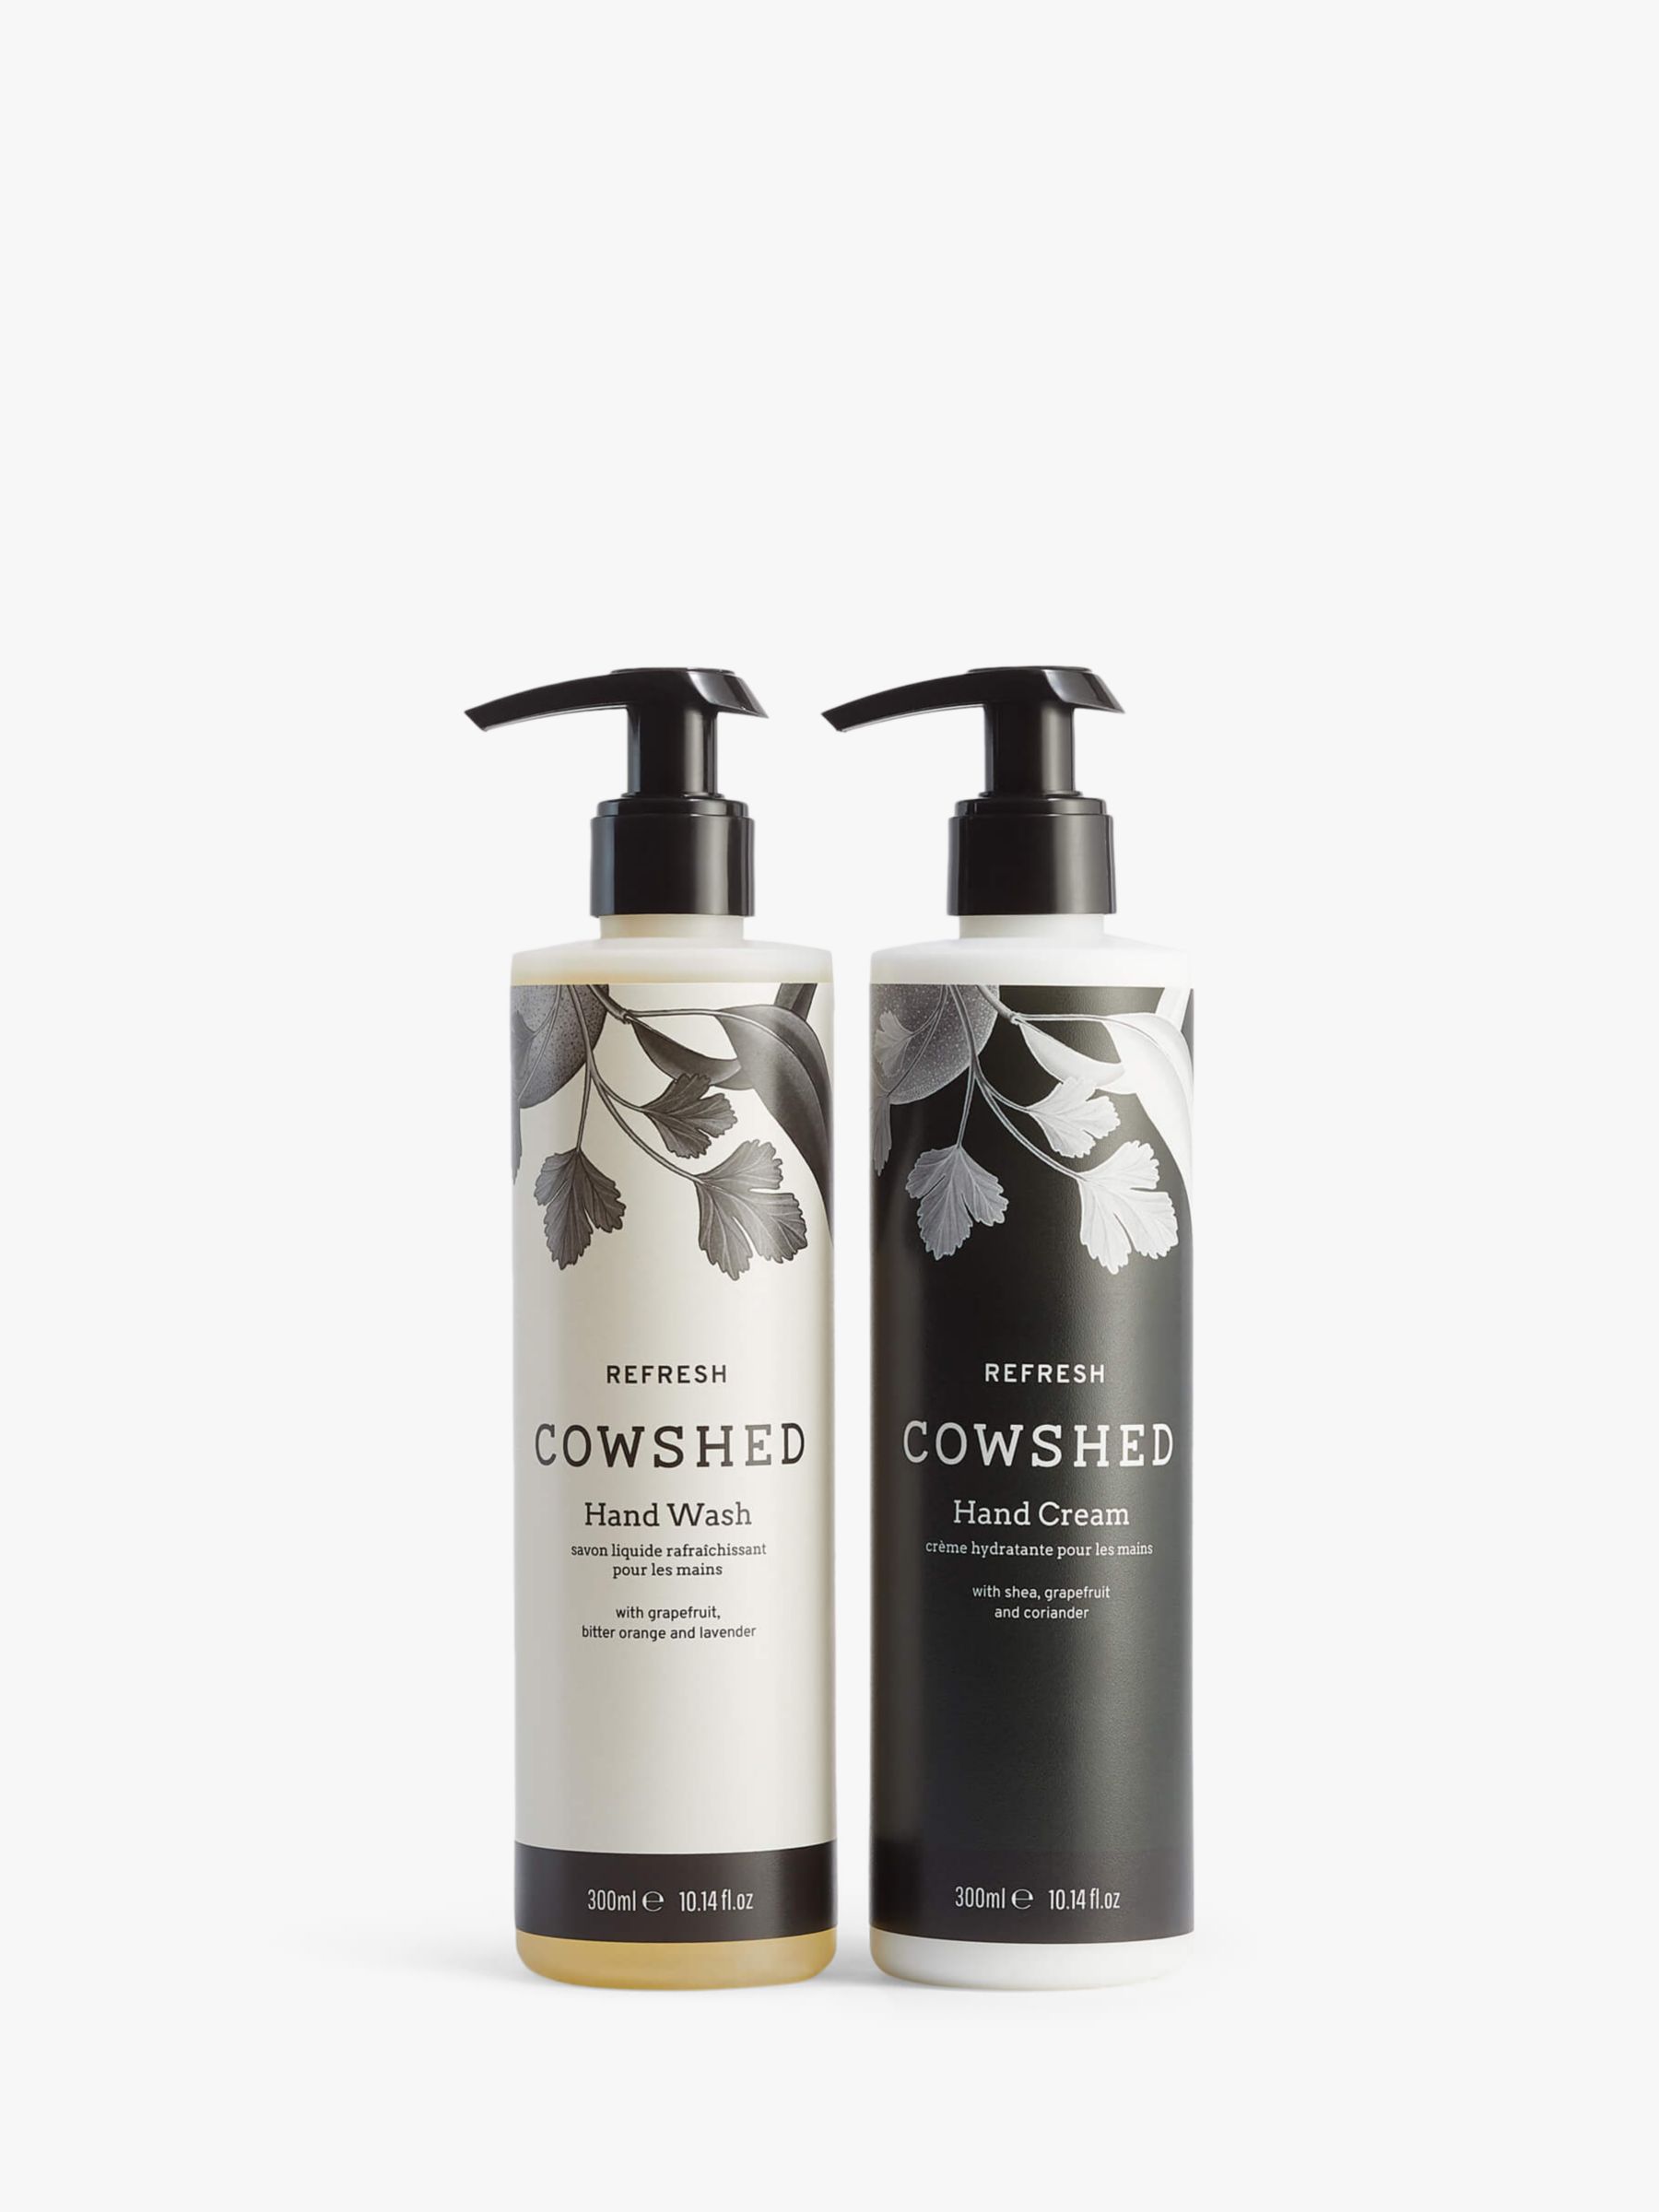 Cowshed Signature Hand Care Duo Bodycare Gift Set 2